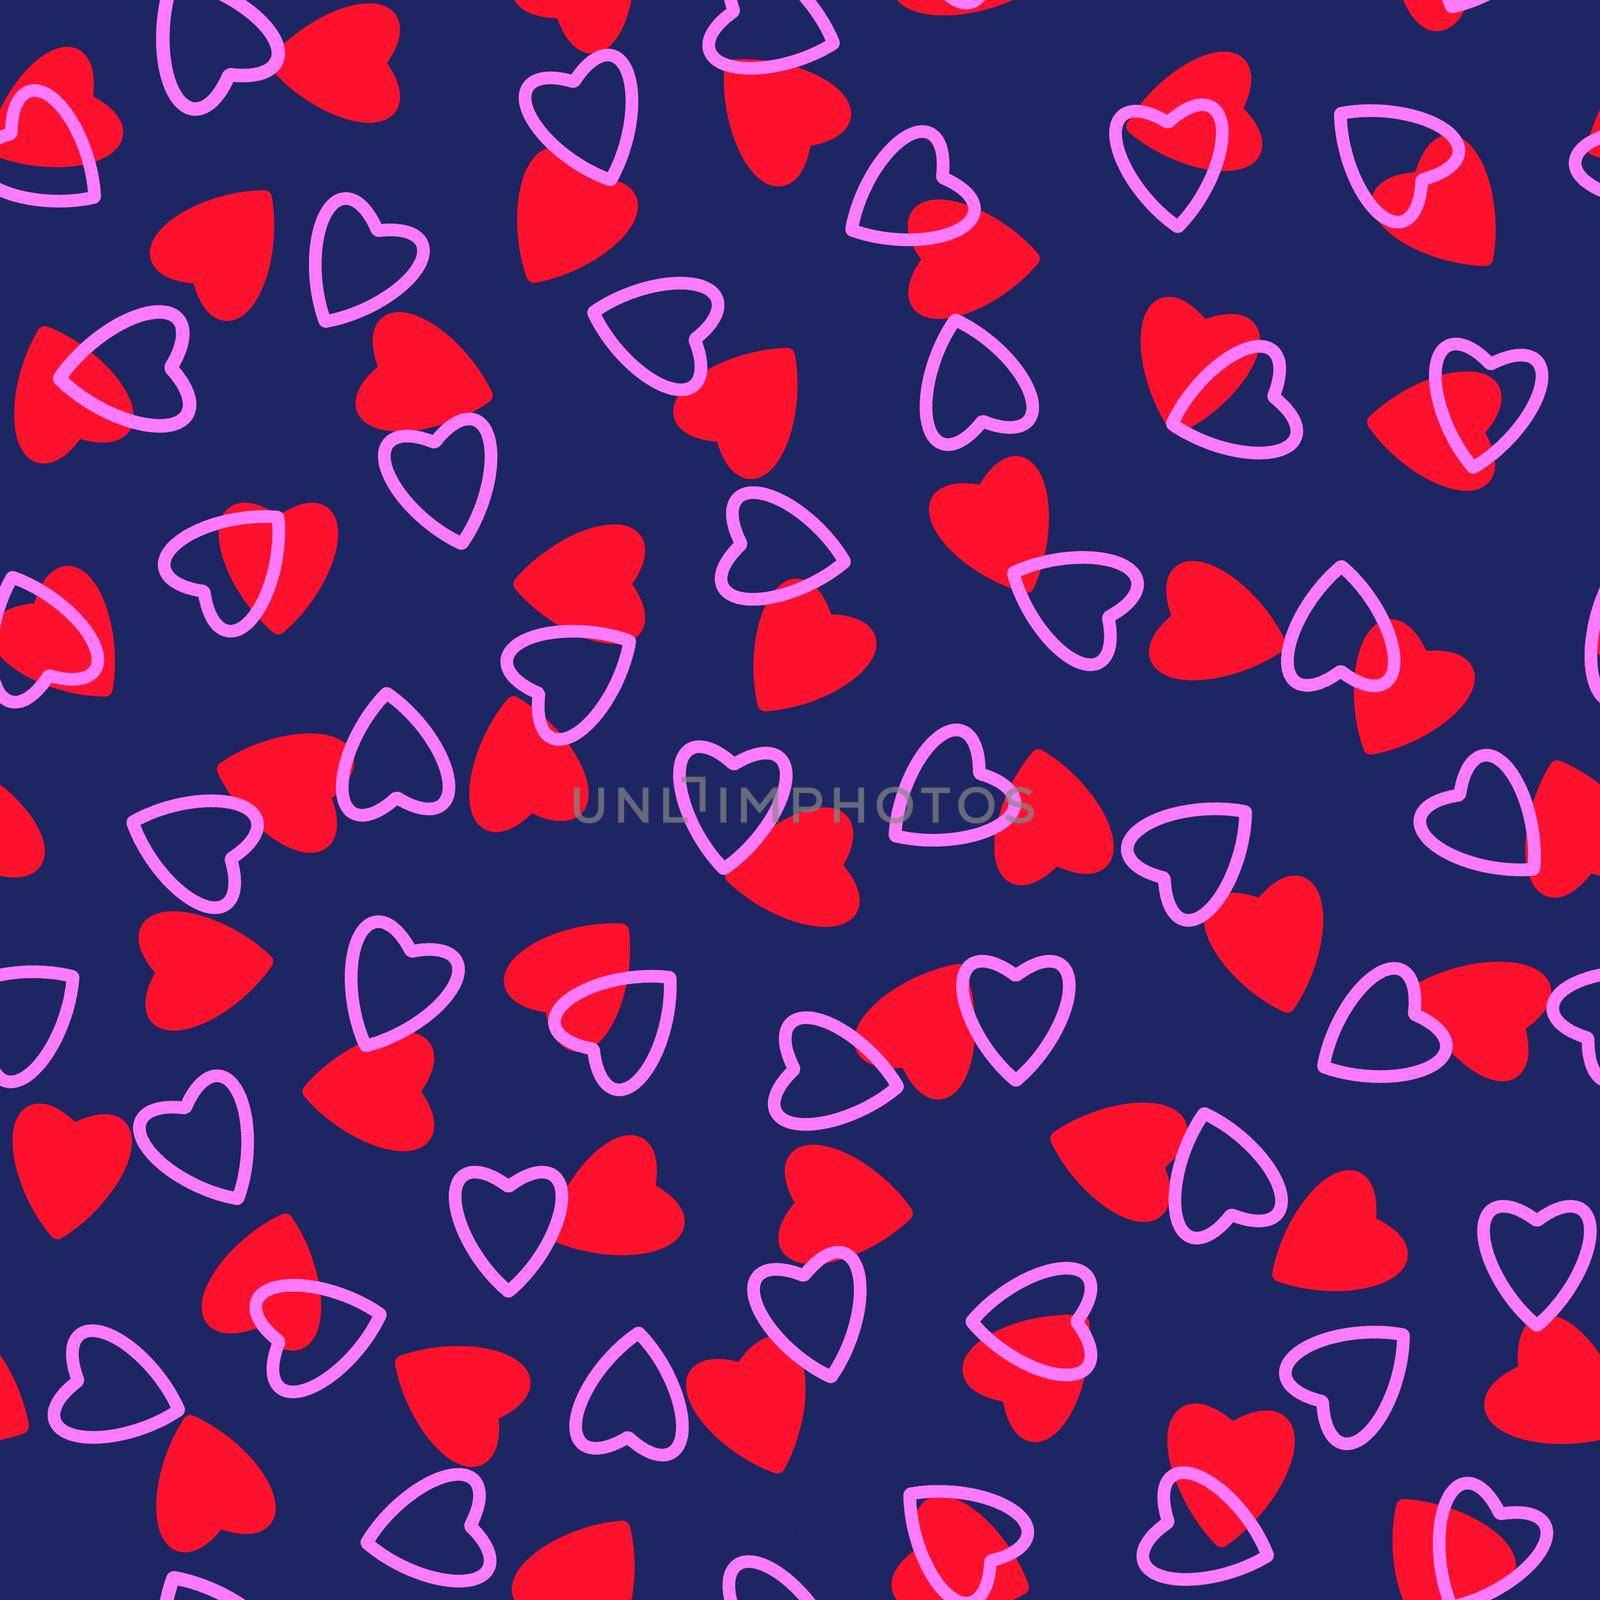 Simple hearts seamless pattern,endless chaotic texture made of tiny heart silhouettes.Valentines,mothers day background.Great for Easter,wedding,scrapbook,gift wrapping paper,textiles.Red,lilac,blue by Angelsmoon